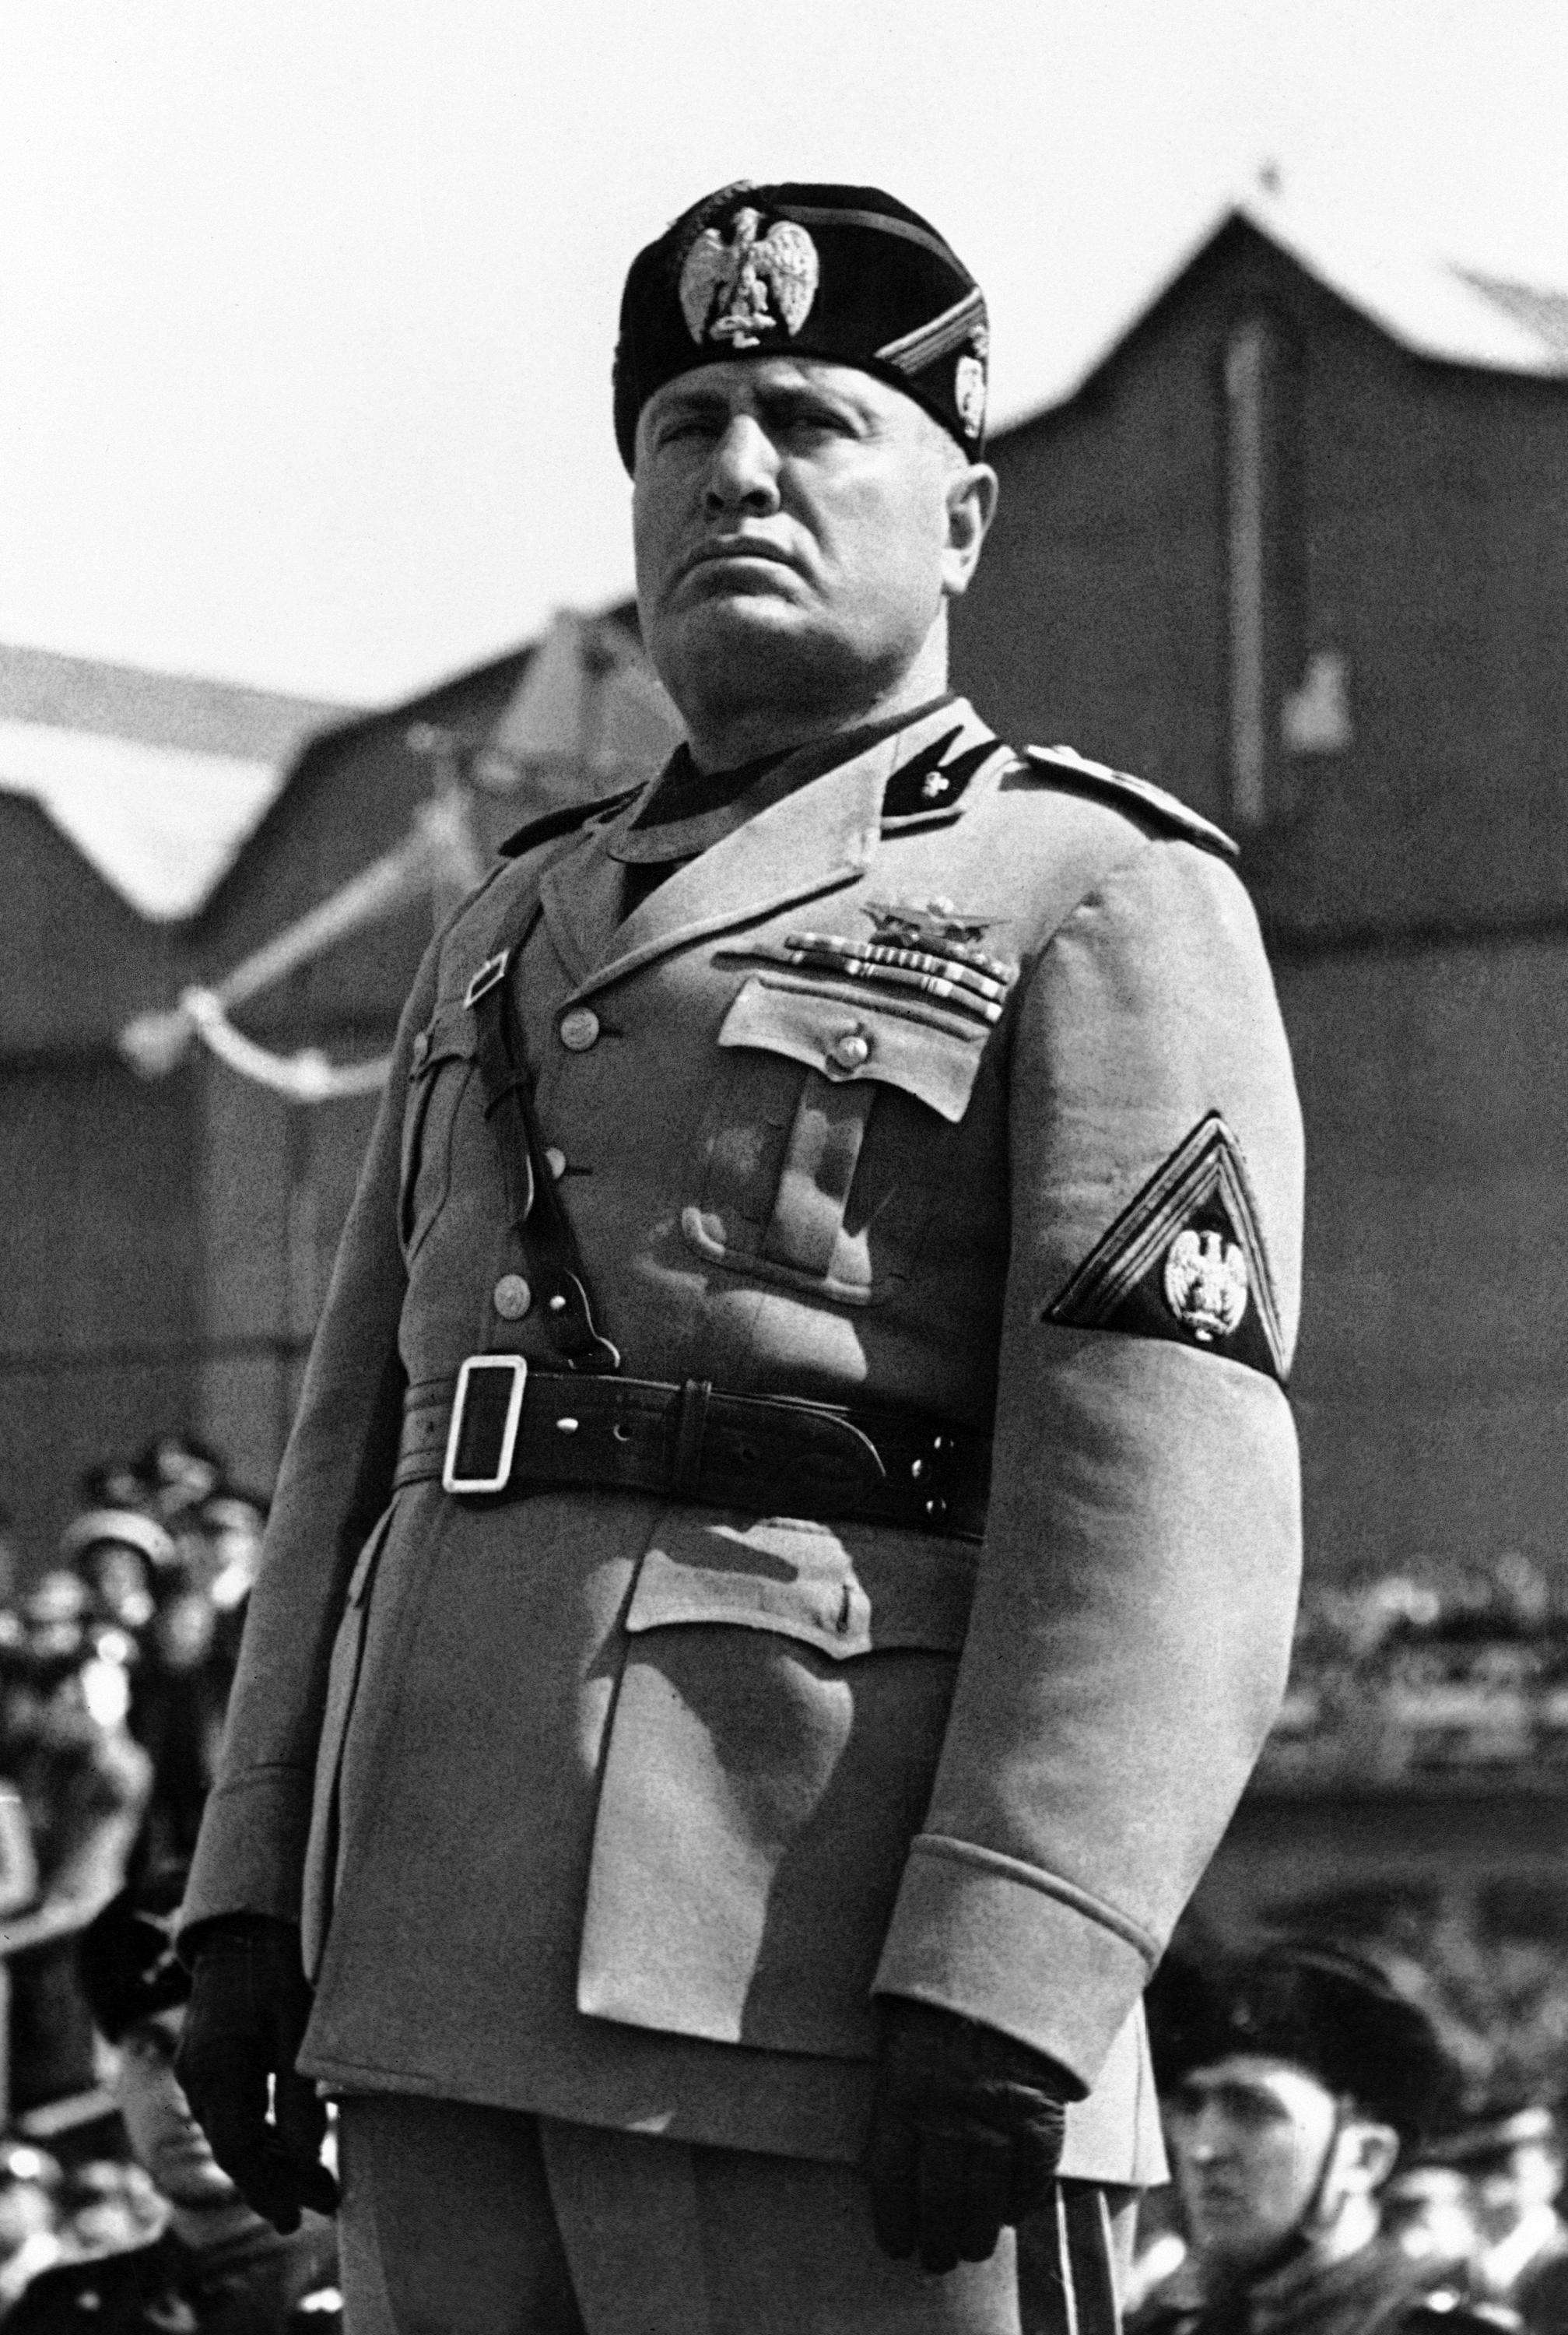 Benito Mussolini, Duce (Leader) of Italy, 1922-1943, founder of the Fascist state which sought to be everything - even god - to its citizens.